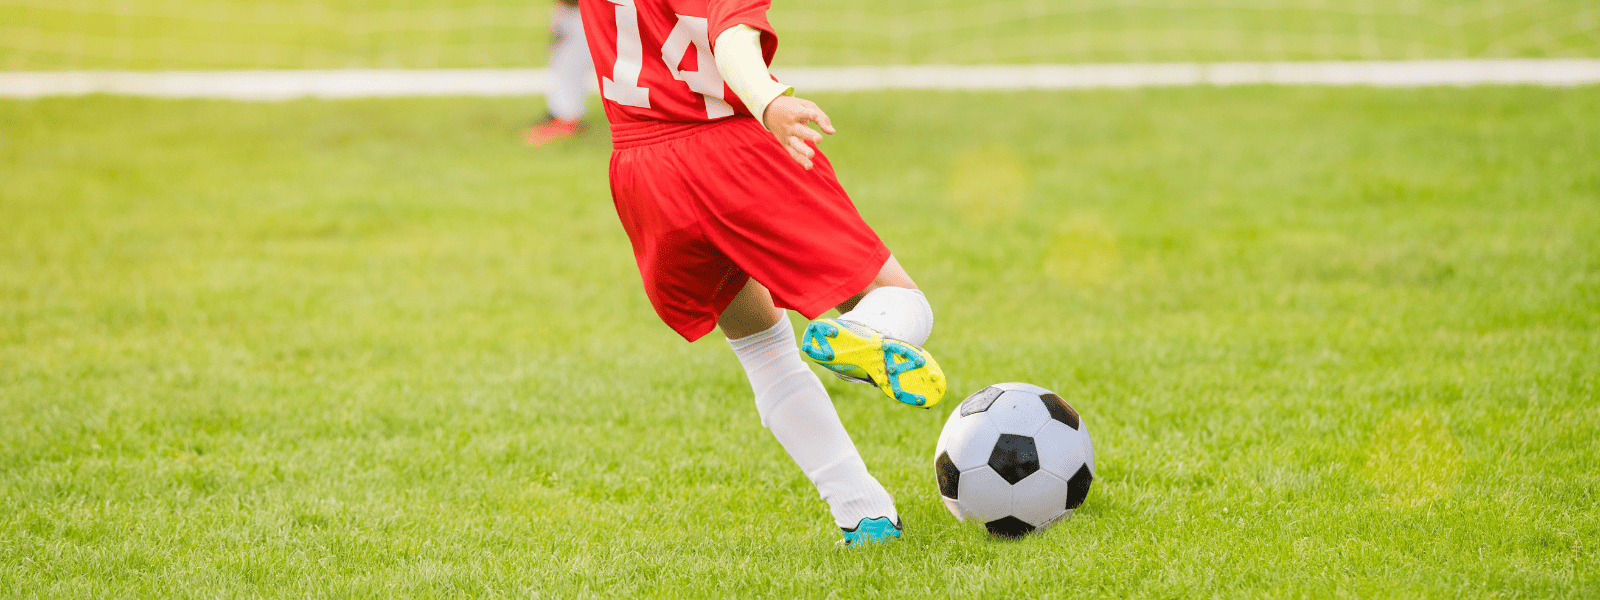 Concussions in Kids Sports & Their Impacts on Learning